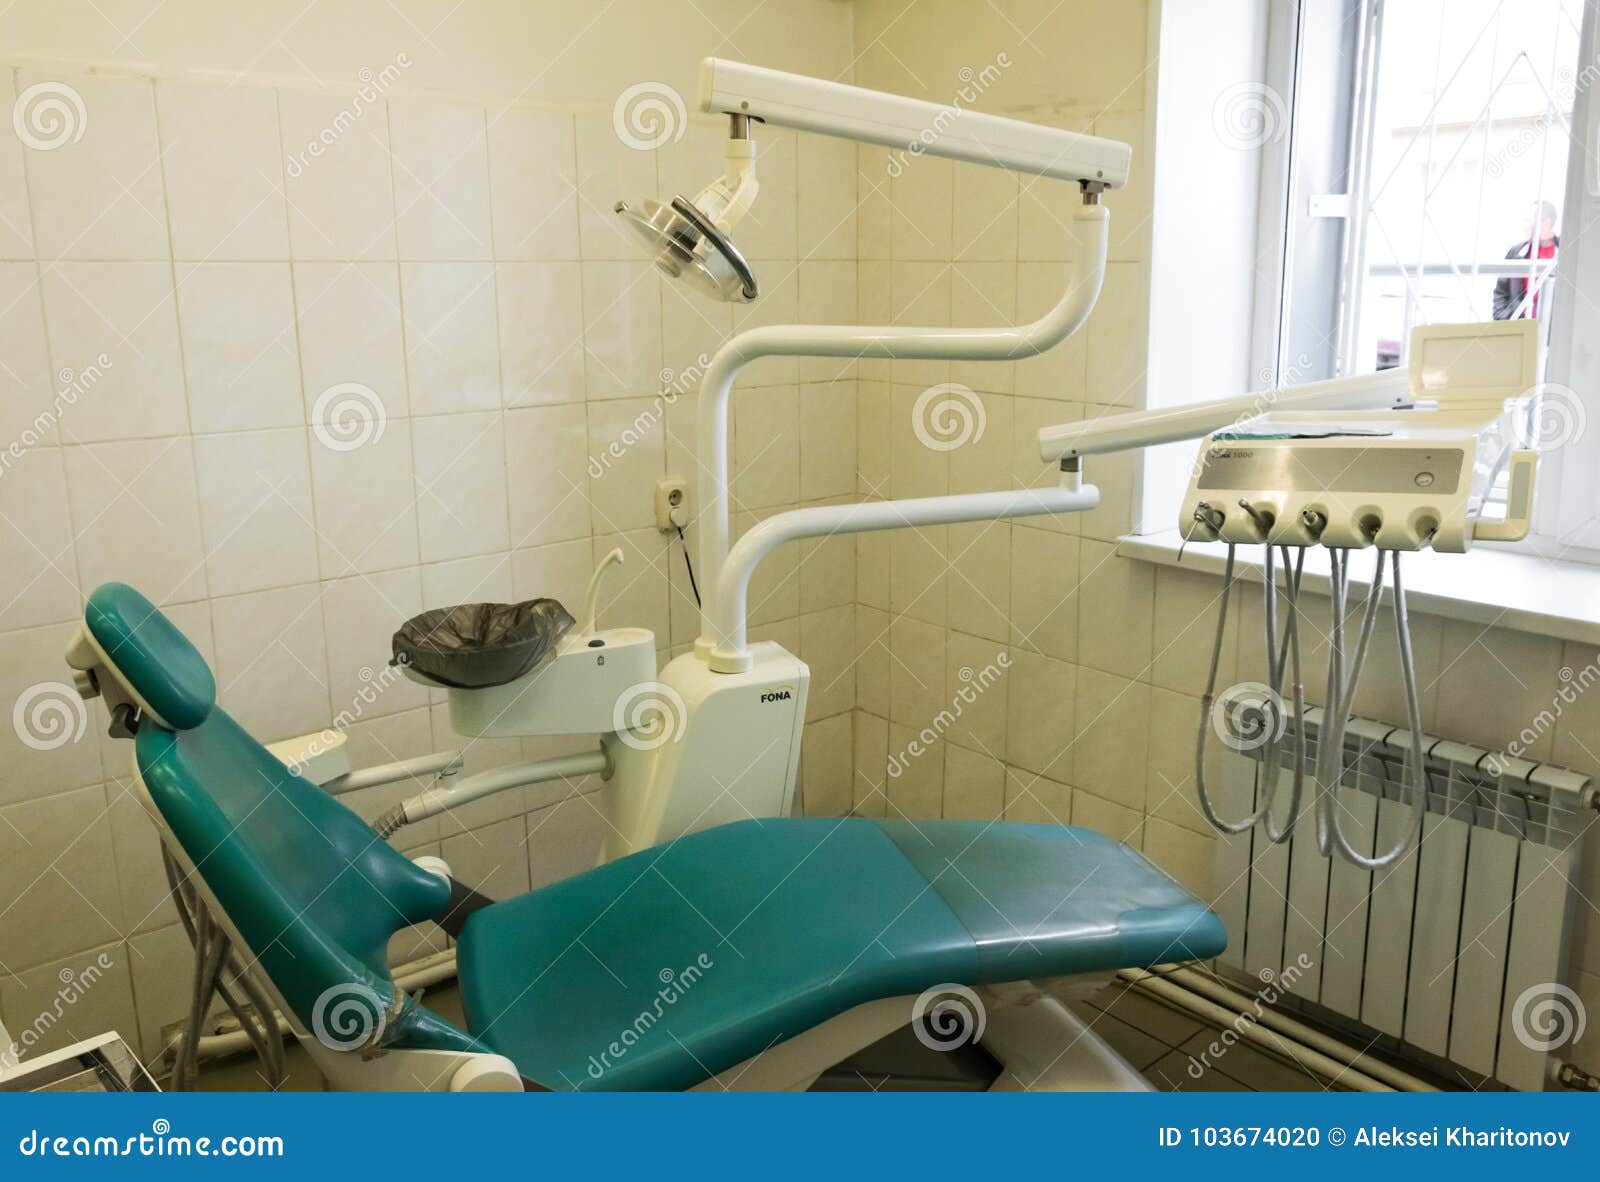 393 Old Dental Chair Photos Free Royalty Free Stock Photos From Dreamstime